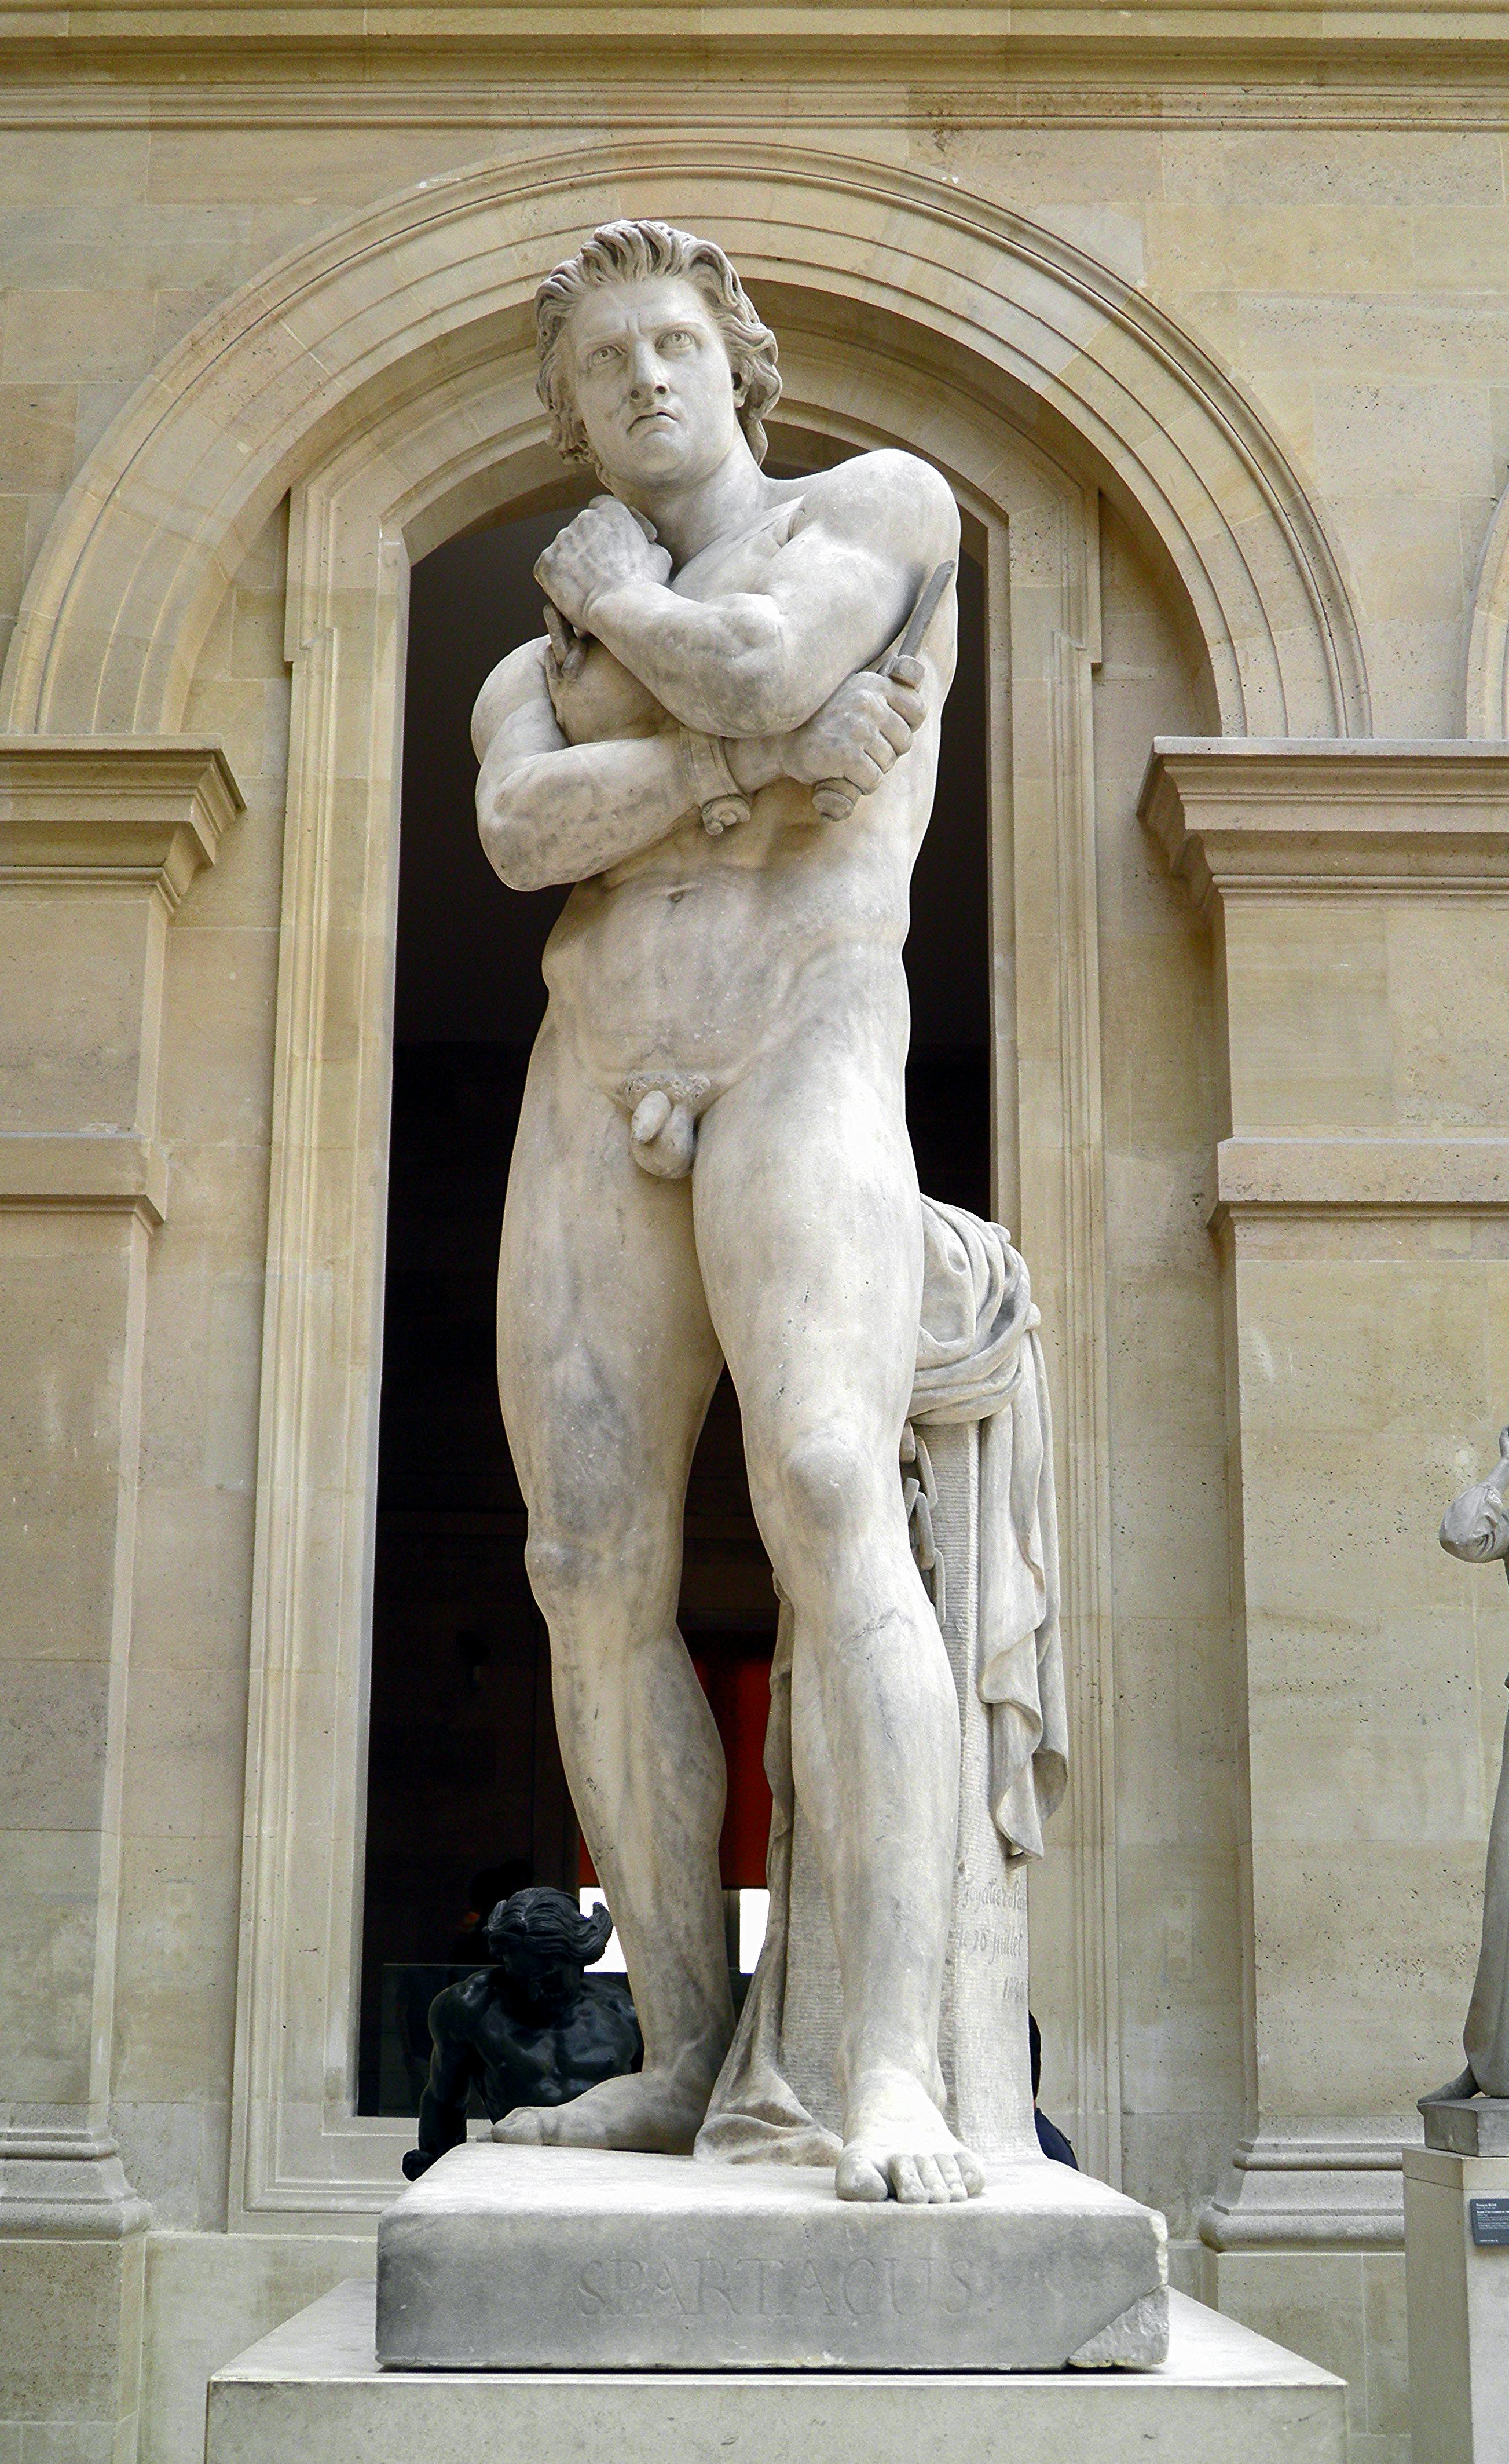 marble statue of naked male, standing with arms folded, dagger in one hand, looking stern and thoughtfully into the distance